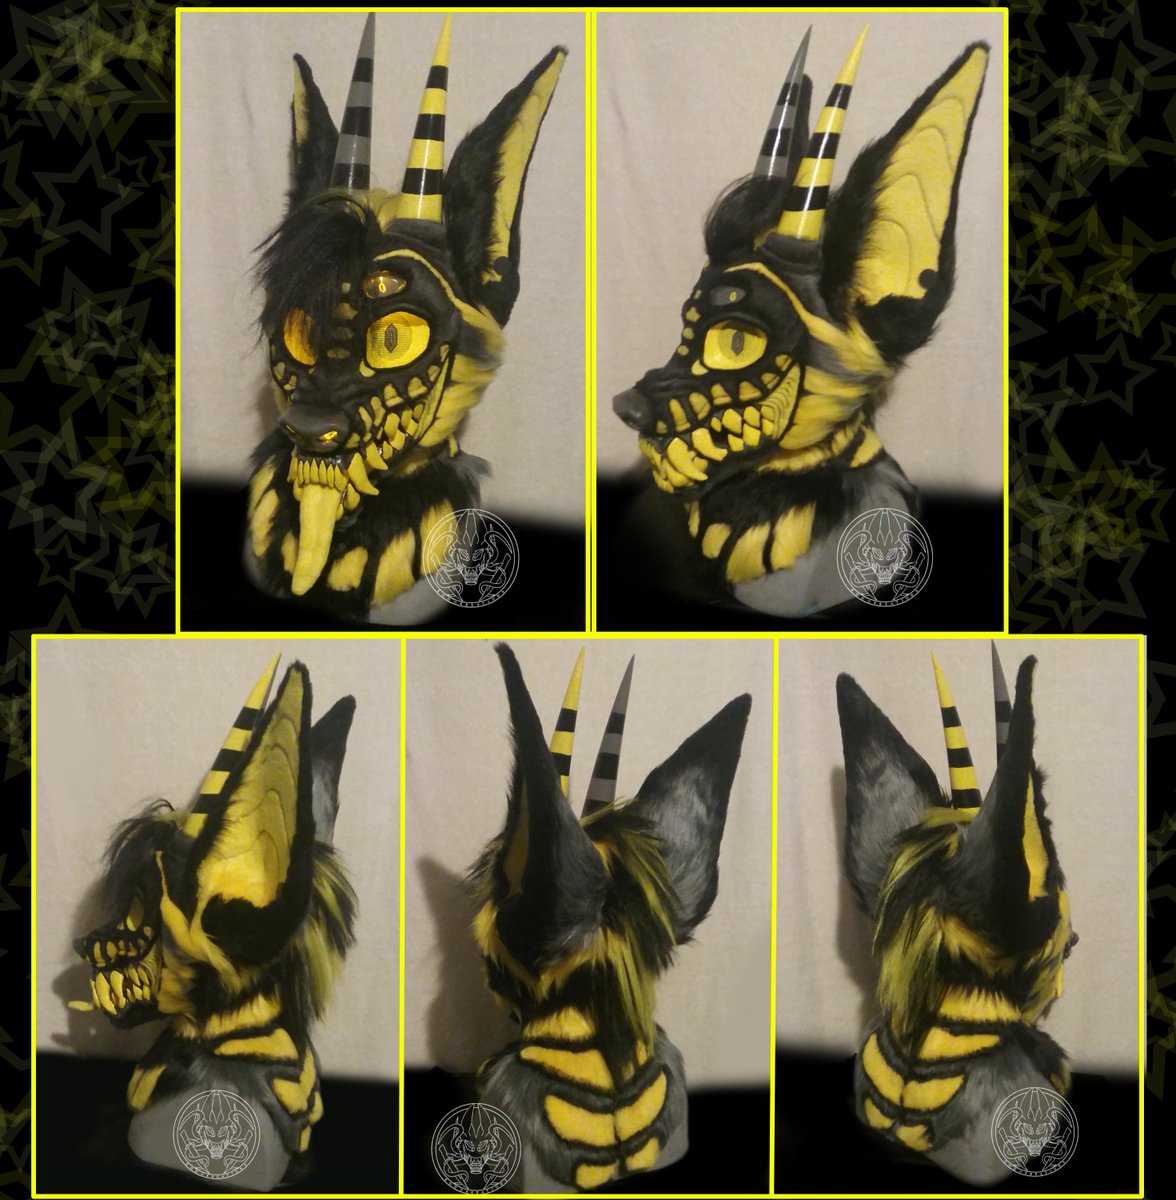 Some additional fursuit photos! 💛 There's LEDs in the eyes, as well as the mouth and nostrils. He also comes with a pair of black magnetic earrings, though custom earrings can also be made! etsy.com/listing/169764…